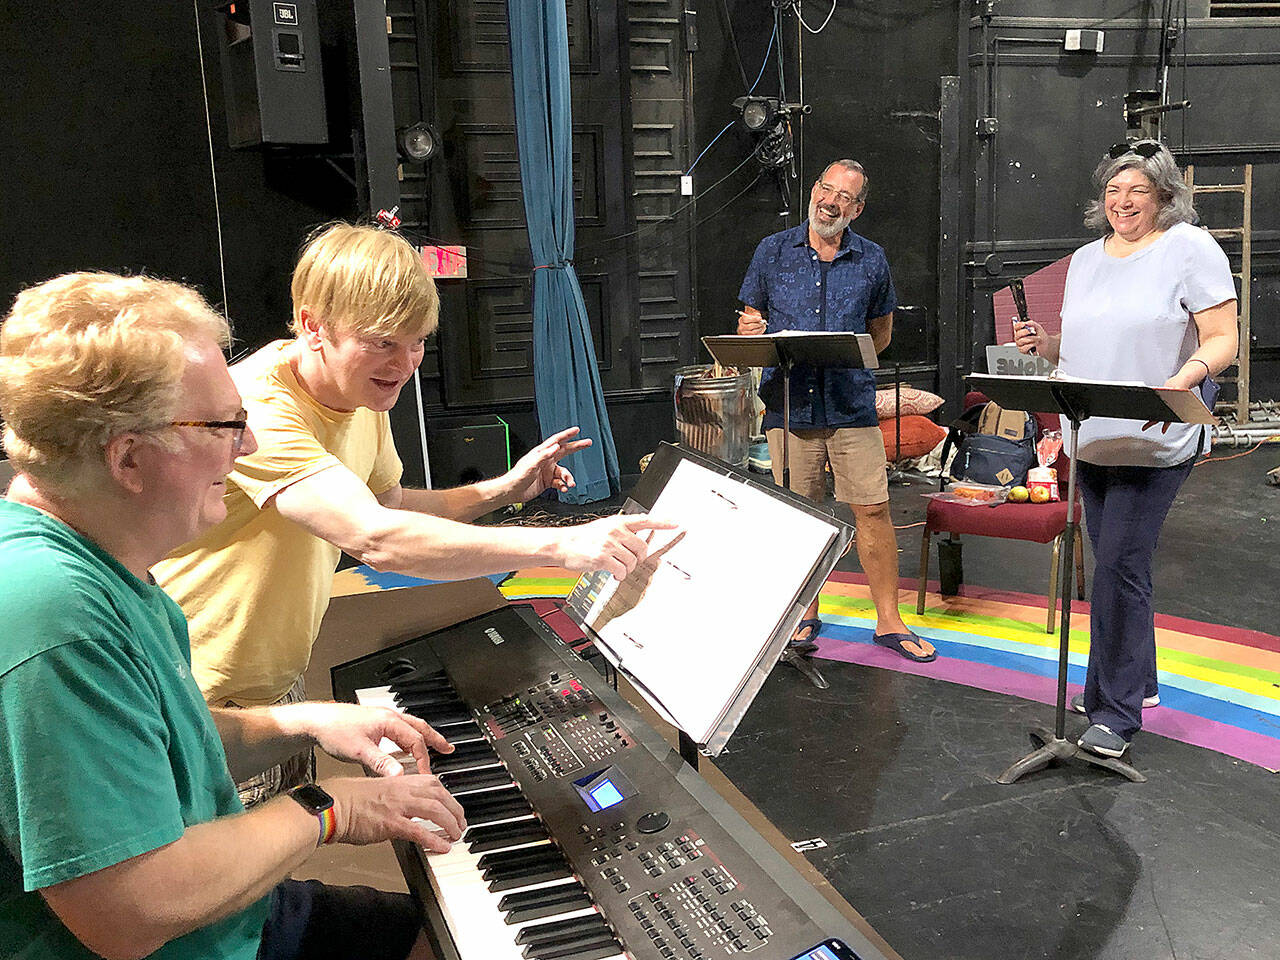 Grammy-winning Broadway orchestrator Steve Orich (second from right) presents his band arrangements to the cast of “Somewhere Between,” a jazz-pop musical by islander Alan Becker. Company members, from left, include Chris Serface, Cassi Q Kohl, Maria Valenzuela, Timothy Wilds, Casey Raiha, Orich, and Paul Linnes. (Alan Becker Photo)